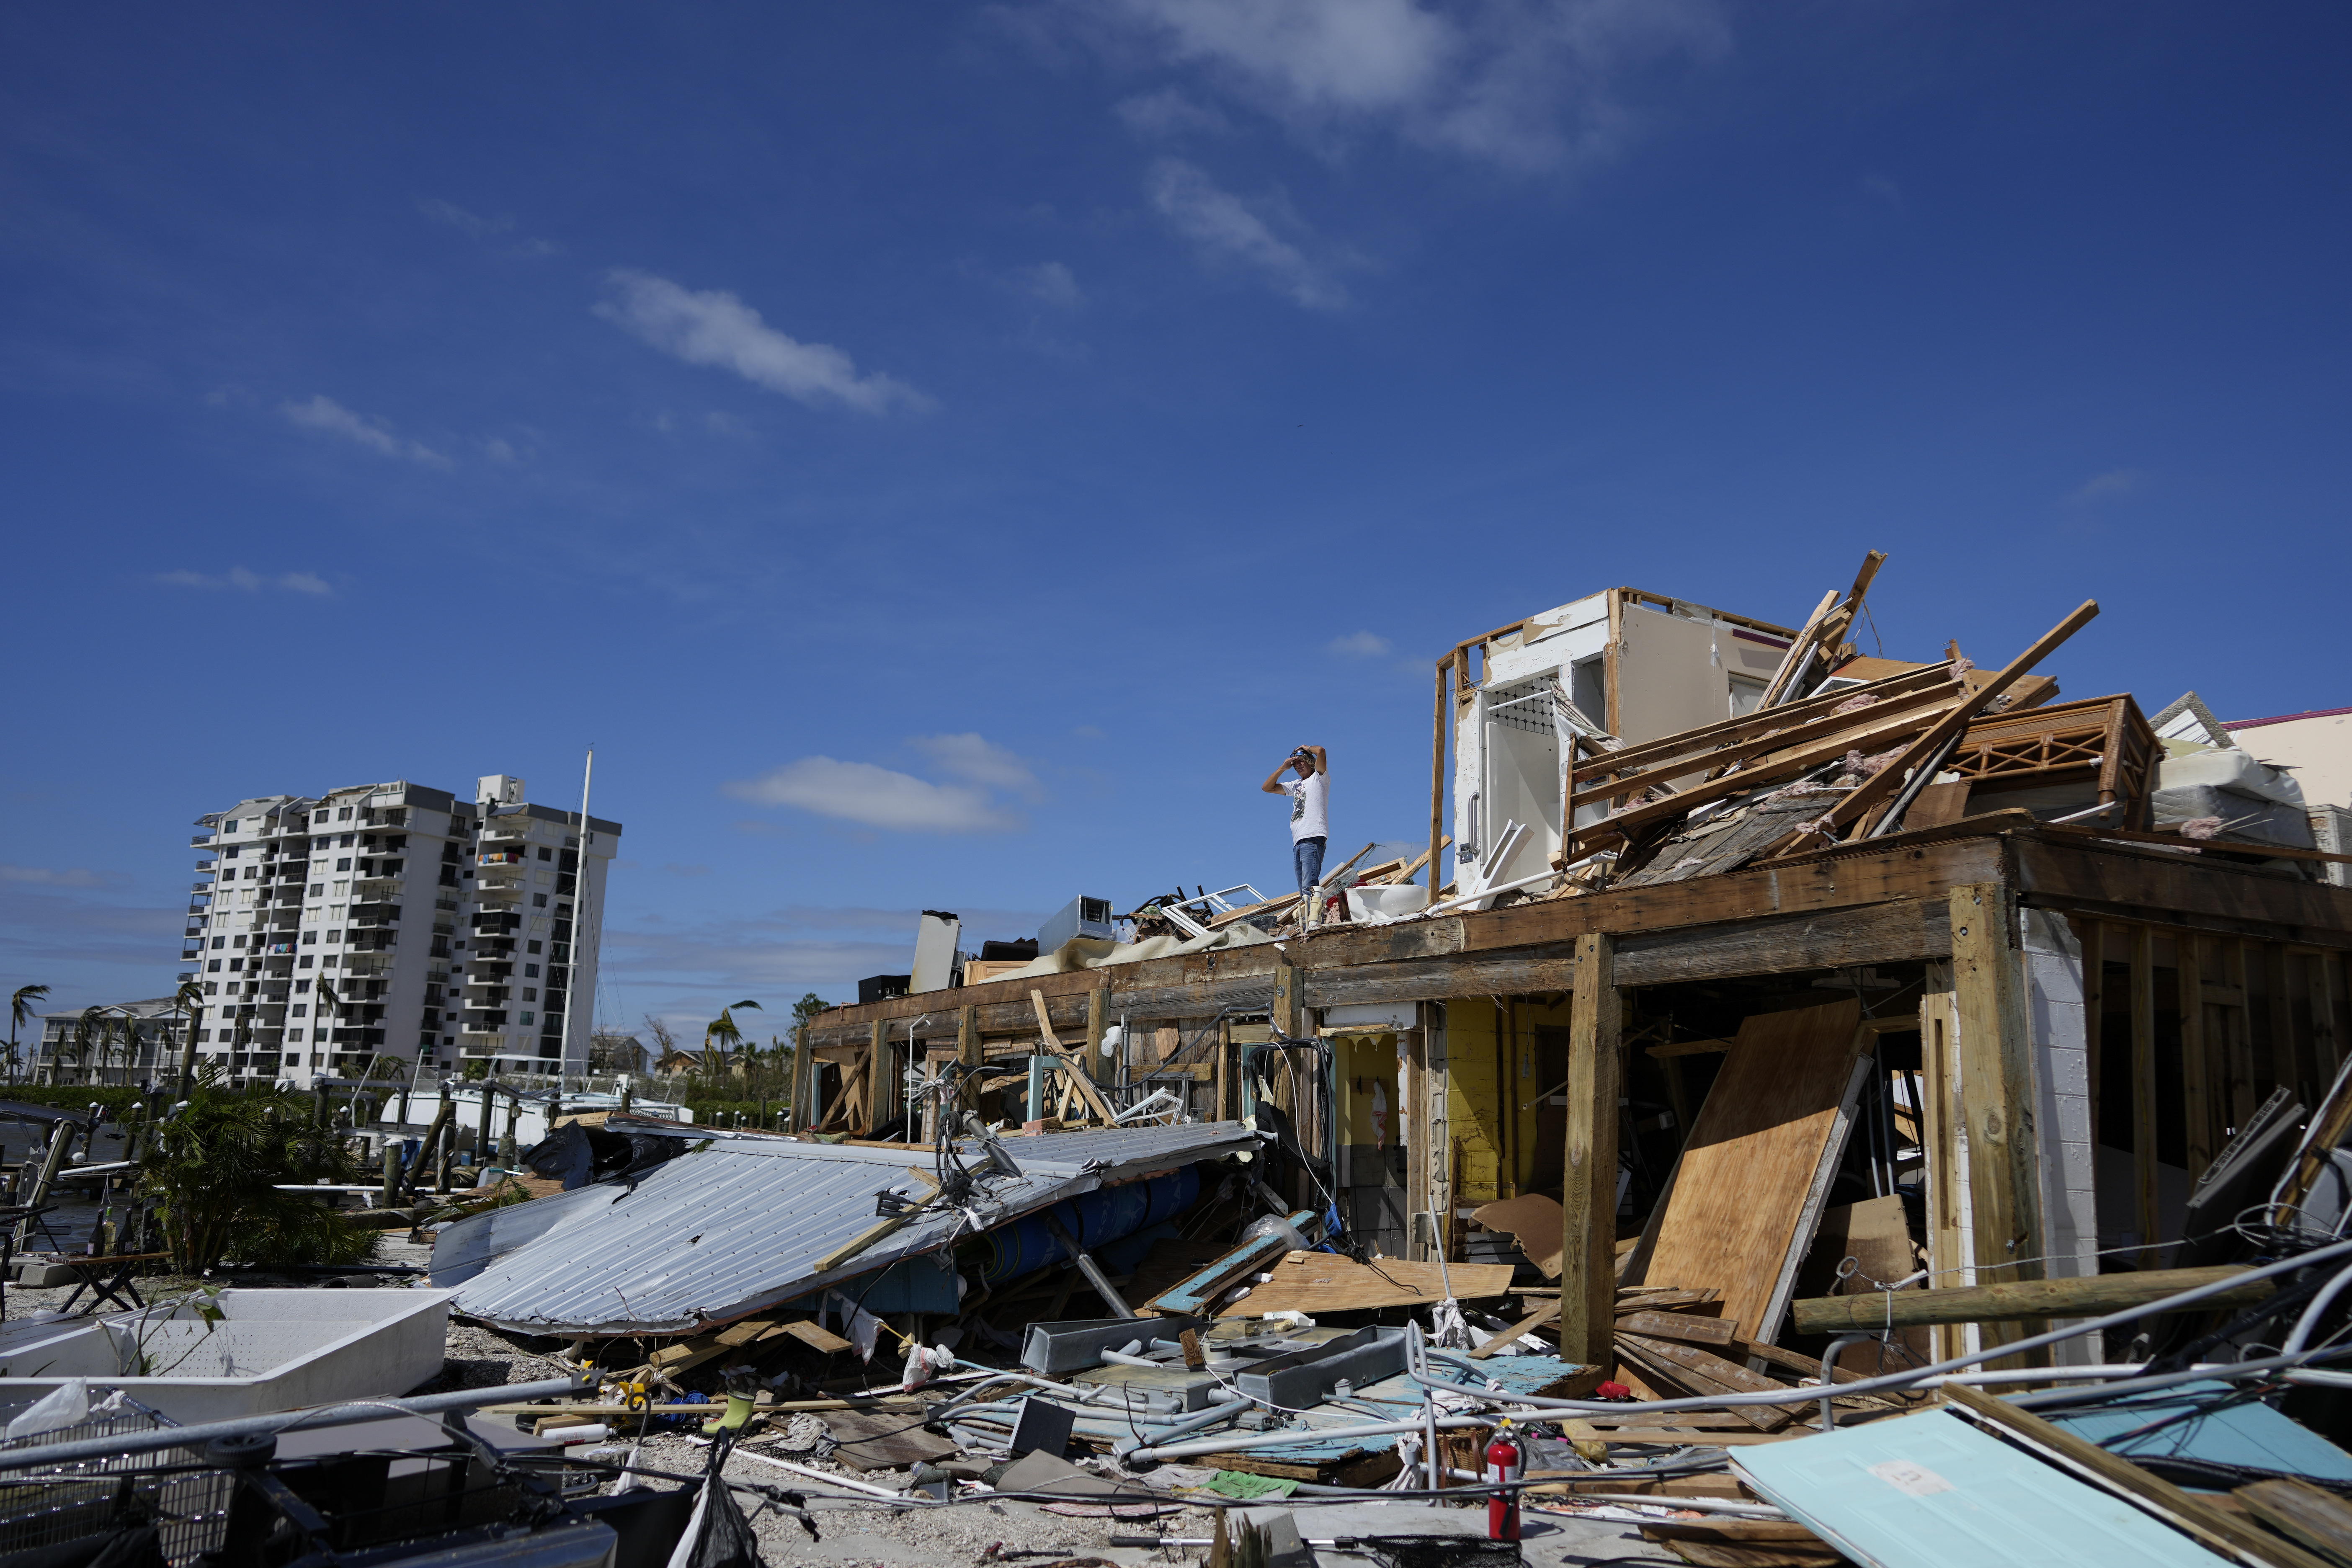 The full impact of the hurricane is still unknown 